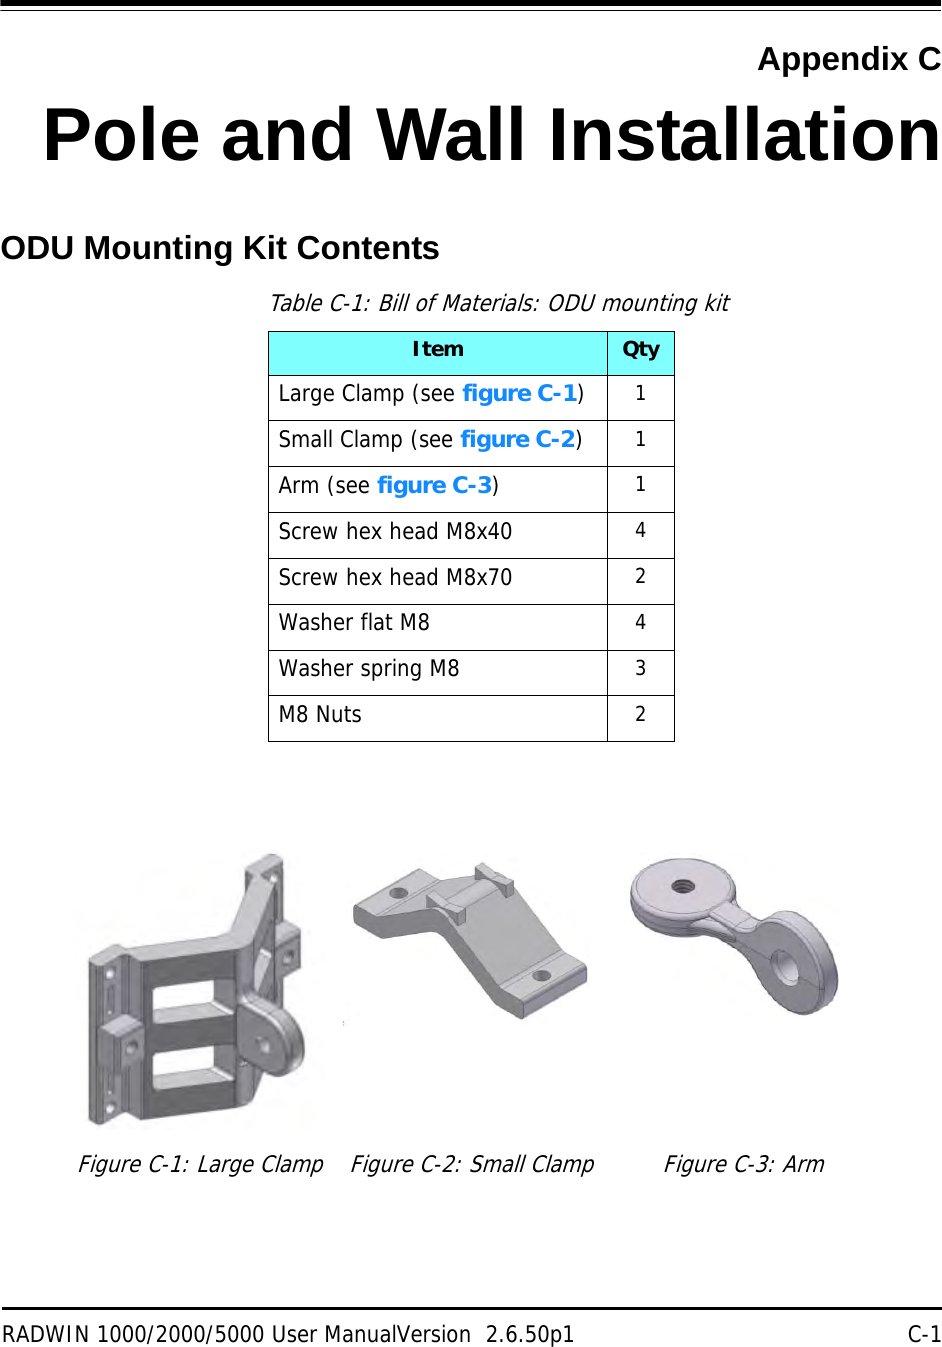 RADWIN 1000/2000/5000 User ManualVersion  2.6.50p1 C-1Appendix CPole and Wall InstallationODU Mounting Kit ContentsTable C-1: Bill of Materials: ODU mounting kitItem QtyLarge Clamp (see figure C-1)1Small Clamp (see figure C-2)1Arm (see figure C-3)1Screw hex head M8x40 4Screw hex head M8x70 2Washer flat M8 4Washer spring M8 3M8 Nuts 2Figure C-1: Large Clamp Figure C-2: Small Clamp Figure C-3: Arm